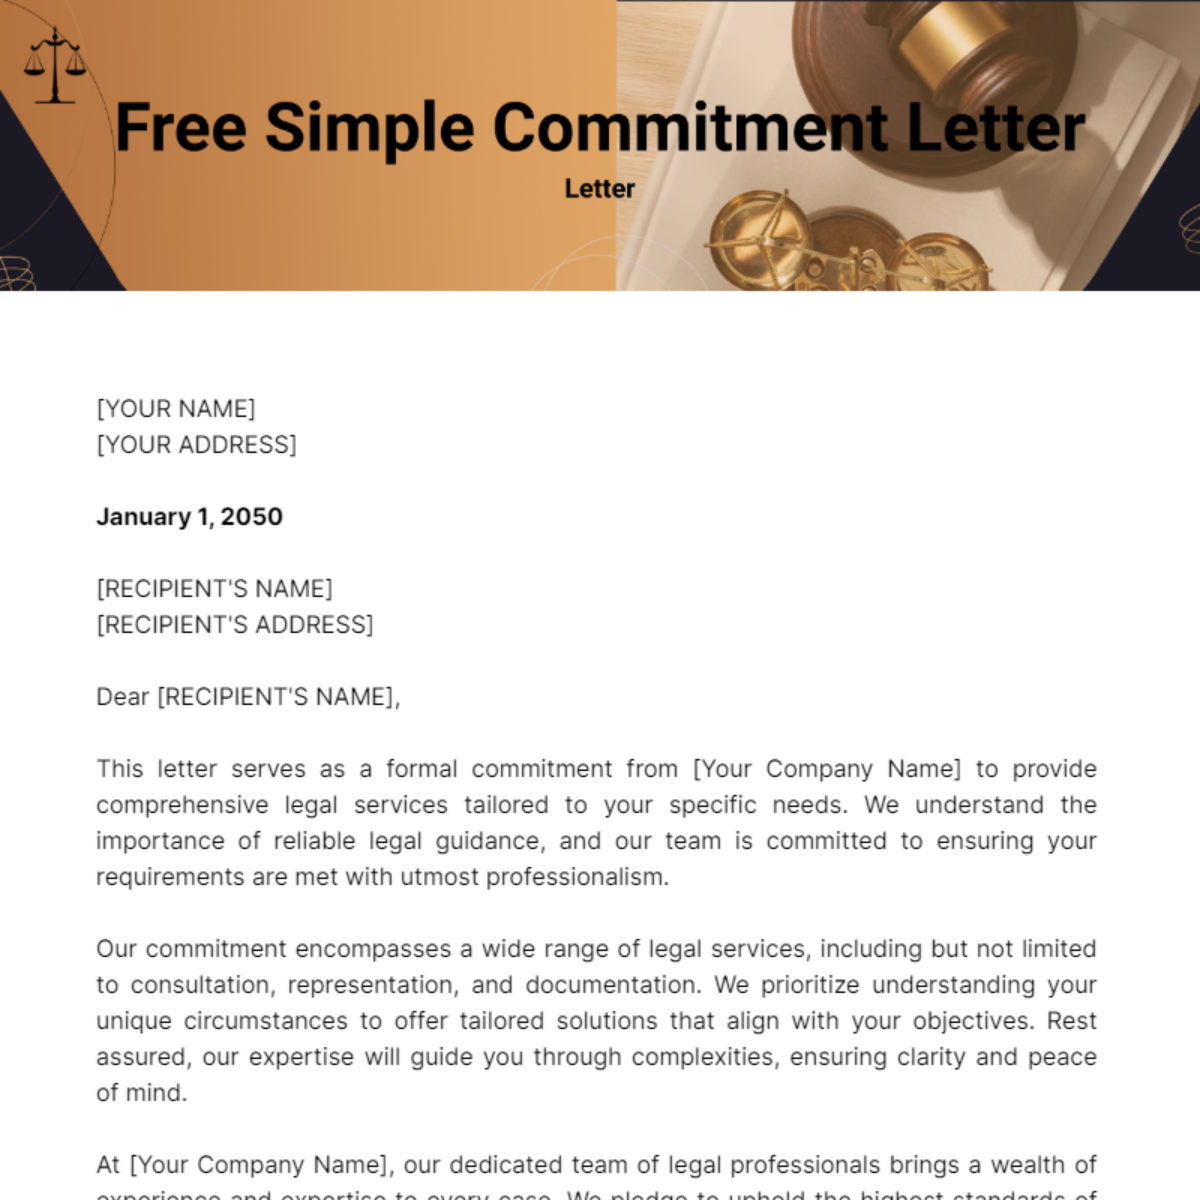 Simple Commitment Letter Template